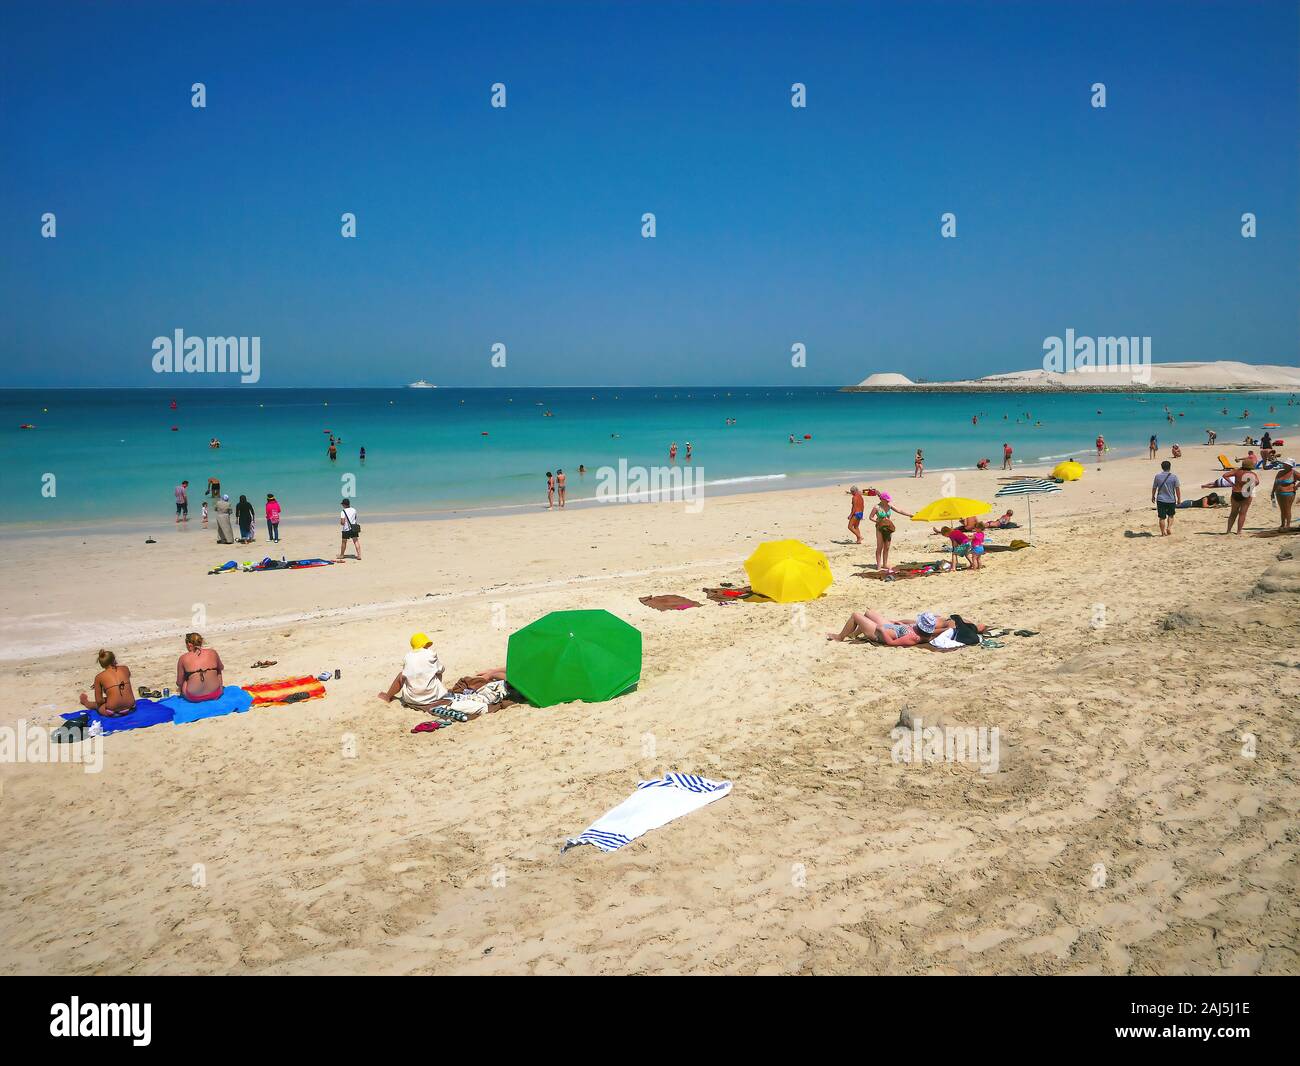 Dubai, UAE - Mar 16, 2013. People sunbathing on Jumeirah Beach in Dubai, and swimming in the turquoise water of the Arabian Gulf on a sunny day. Stock Photo